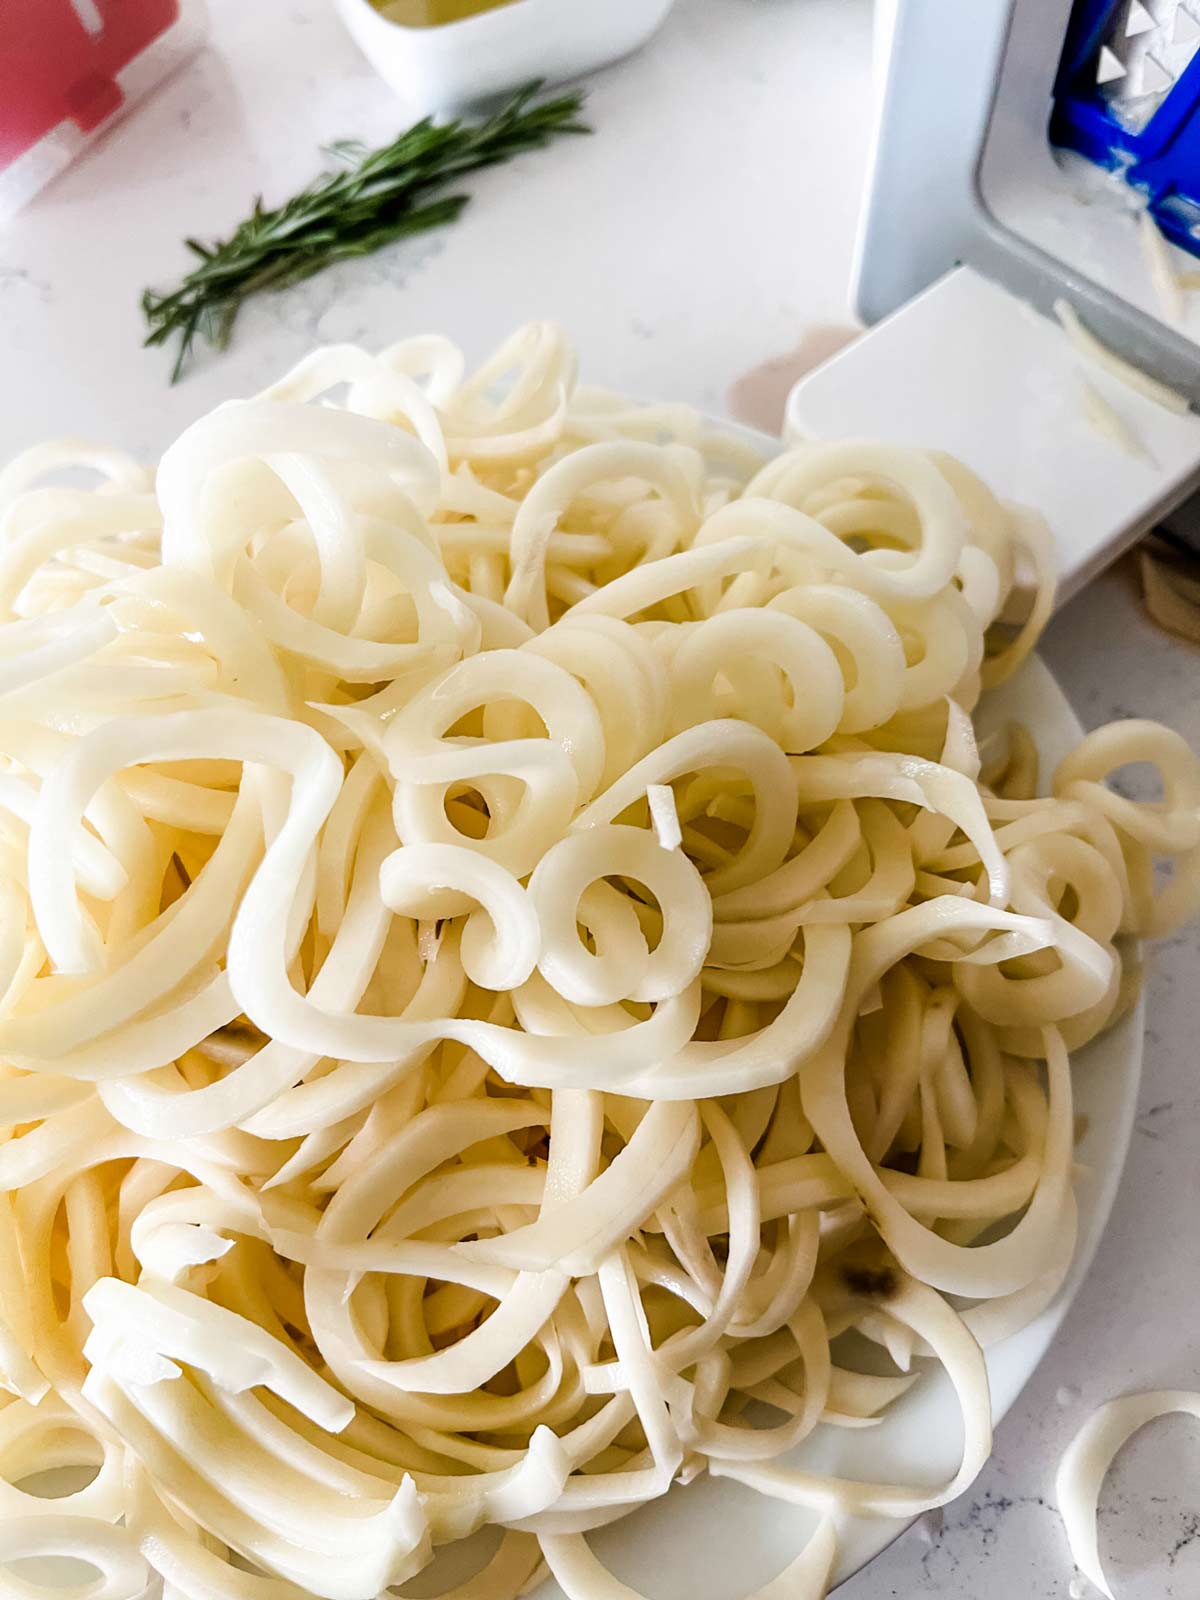 Spiralized potatoes on a plate.